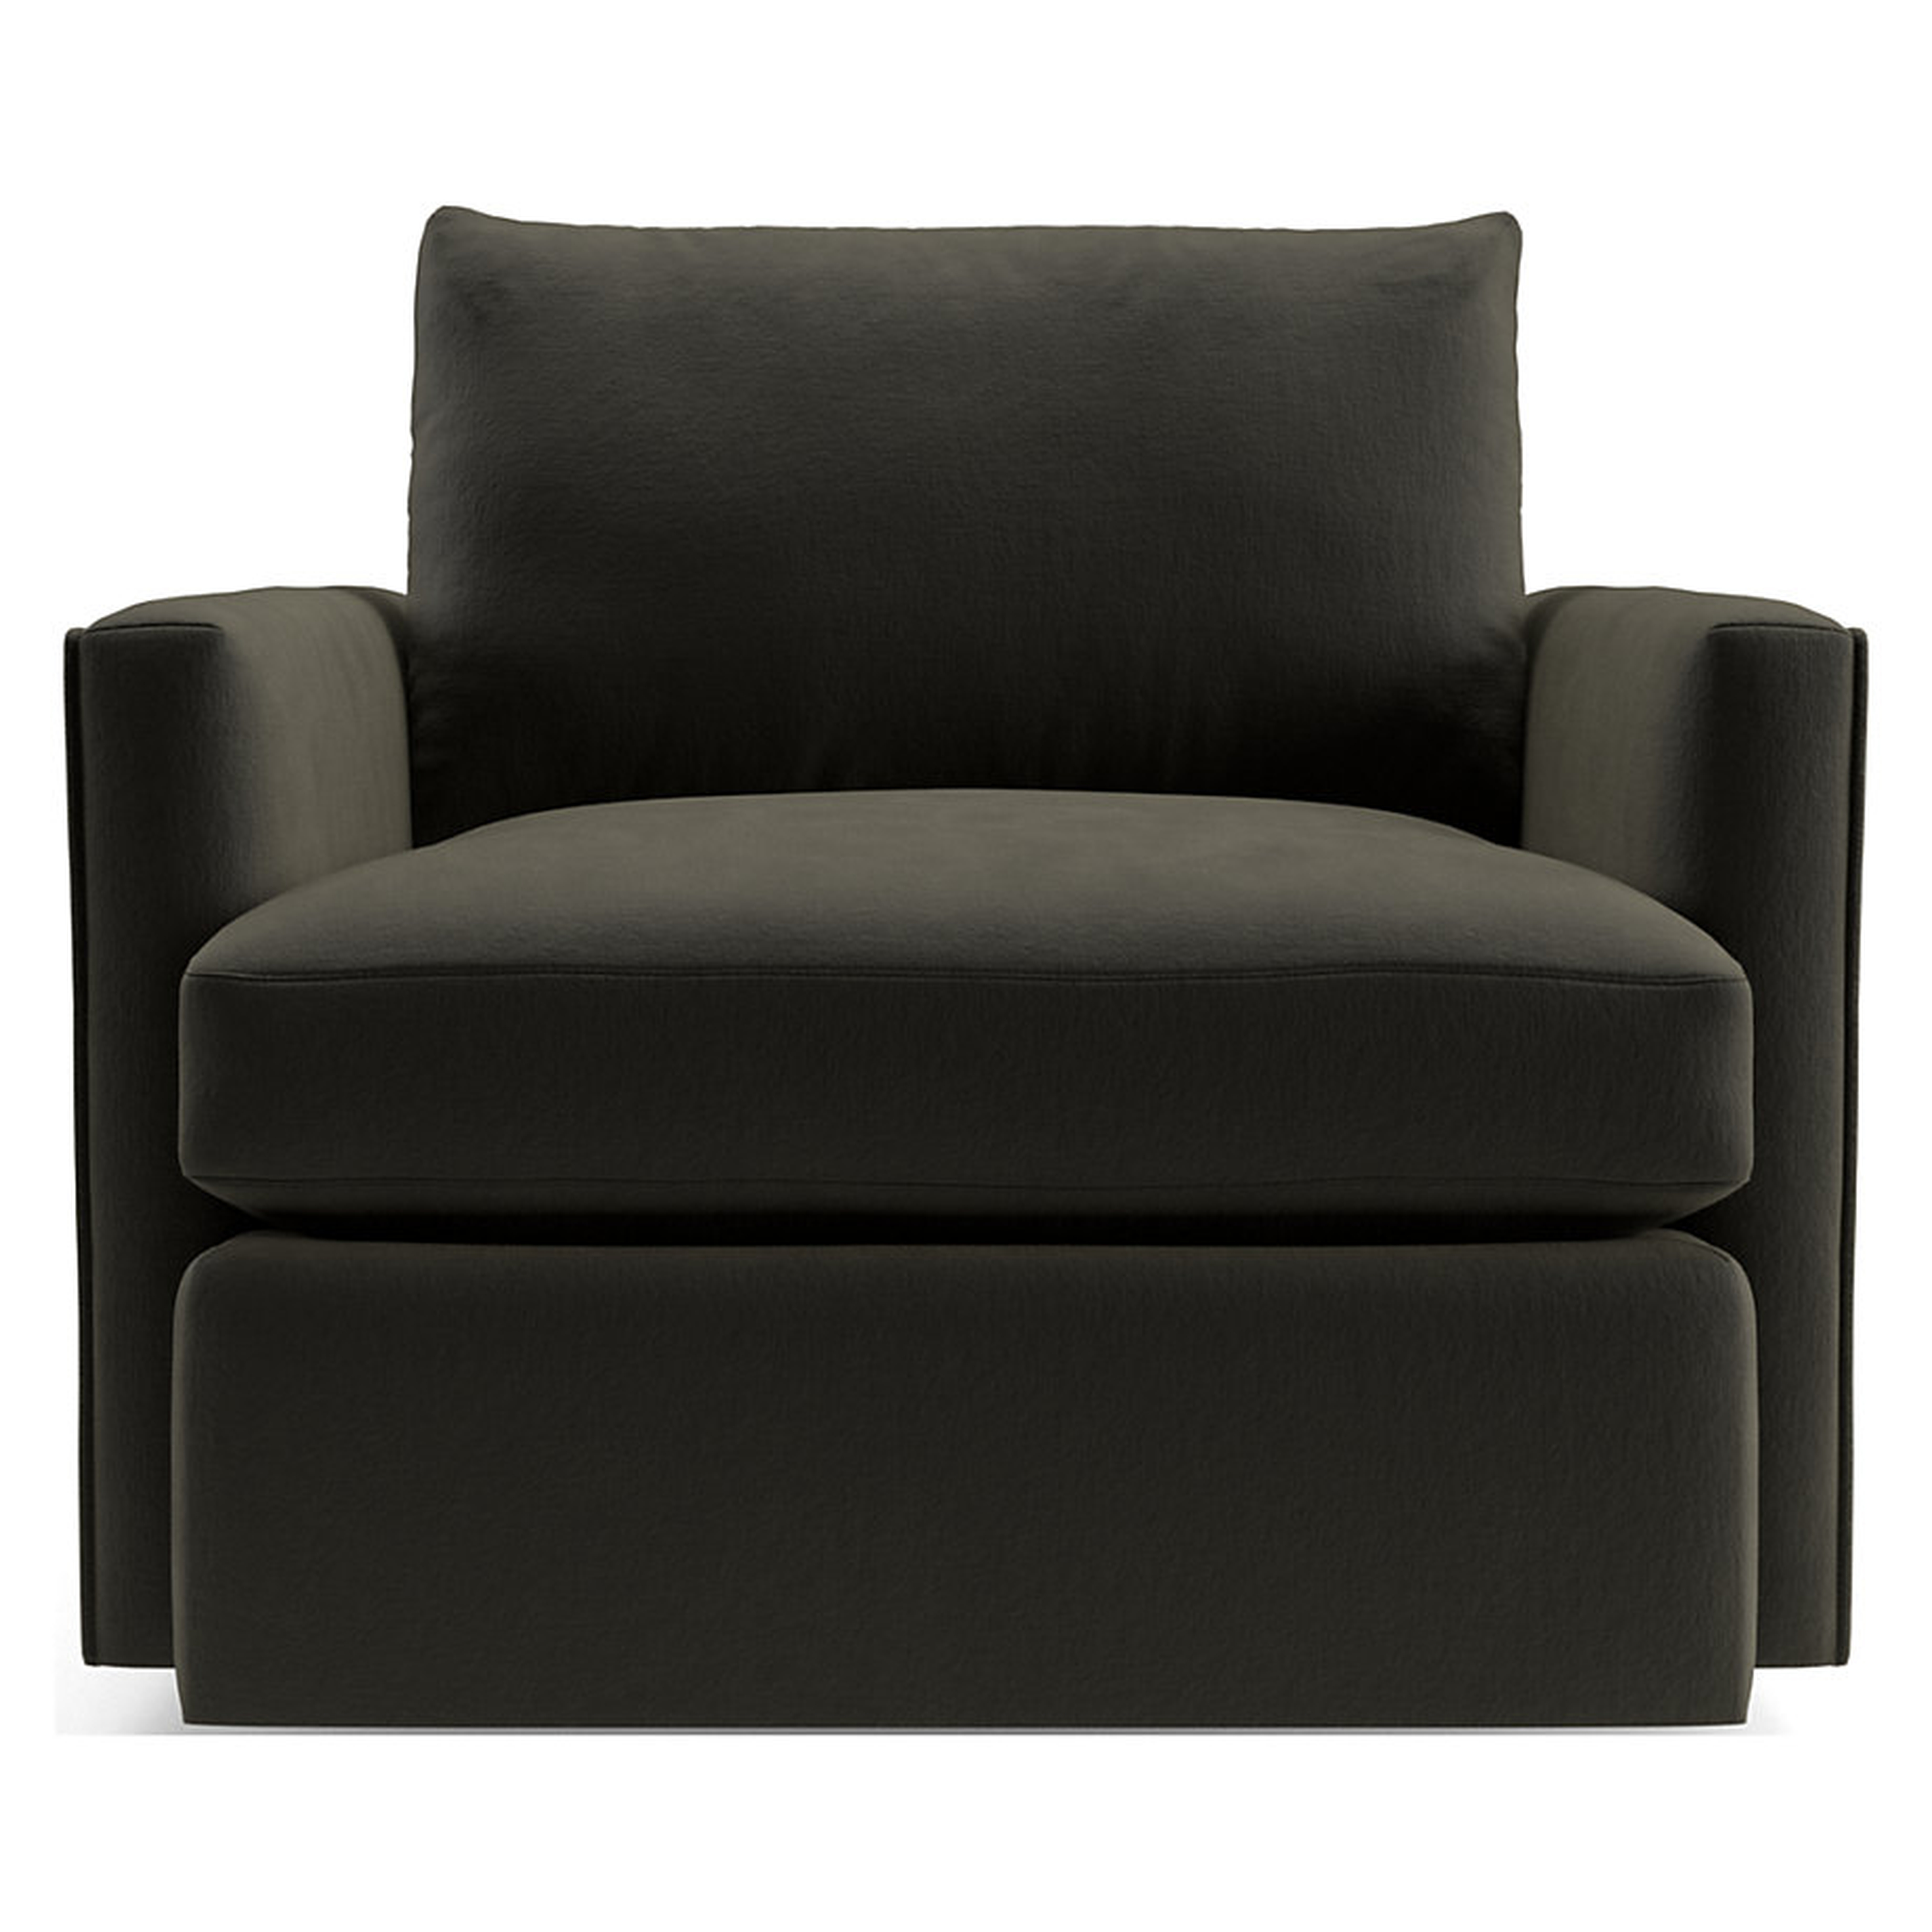 Lounge Deep 360 Swivel Chair - Crate and Barrel